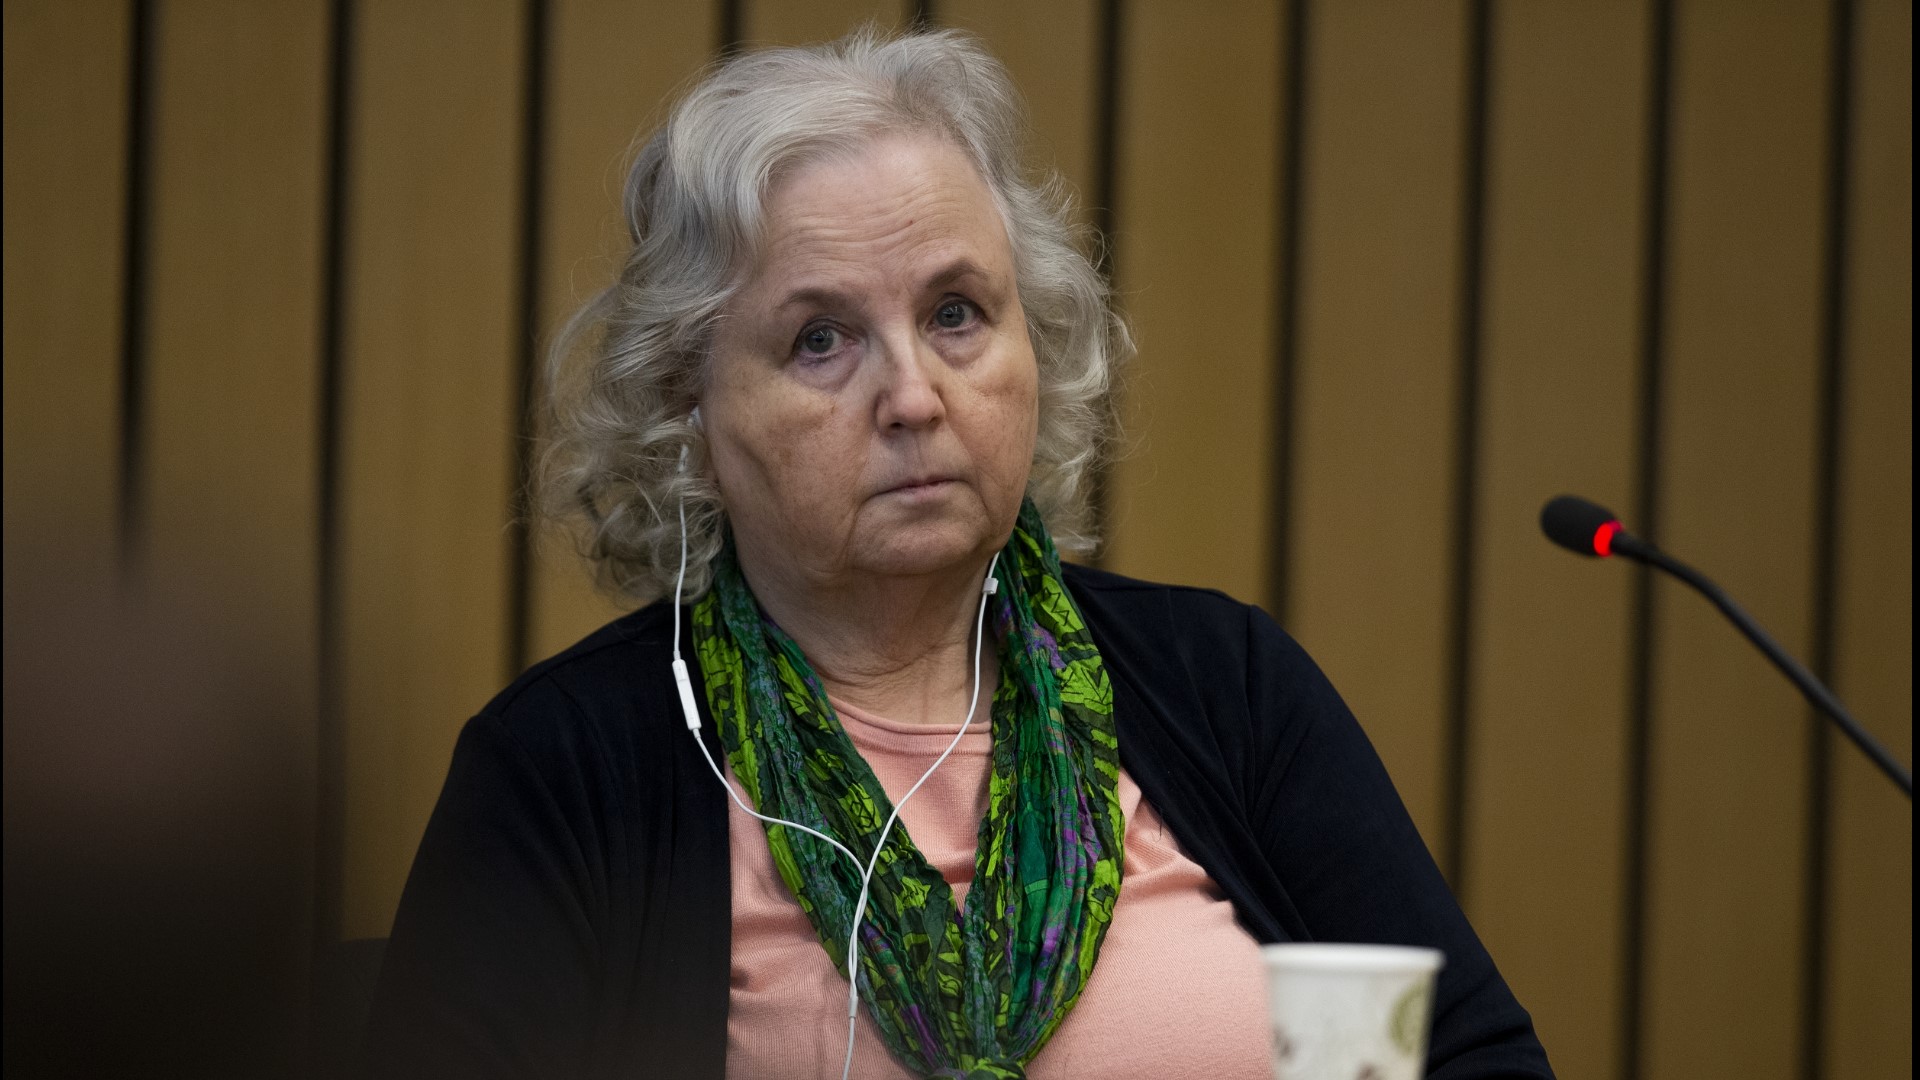 The 71-year-old romance novelist was convicted last month of killing her husband in 2018. She will be eligible for parole after 25 years.